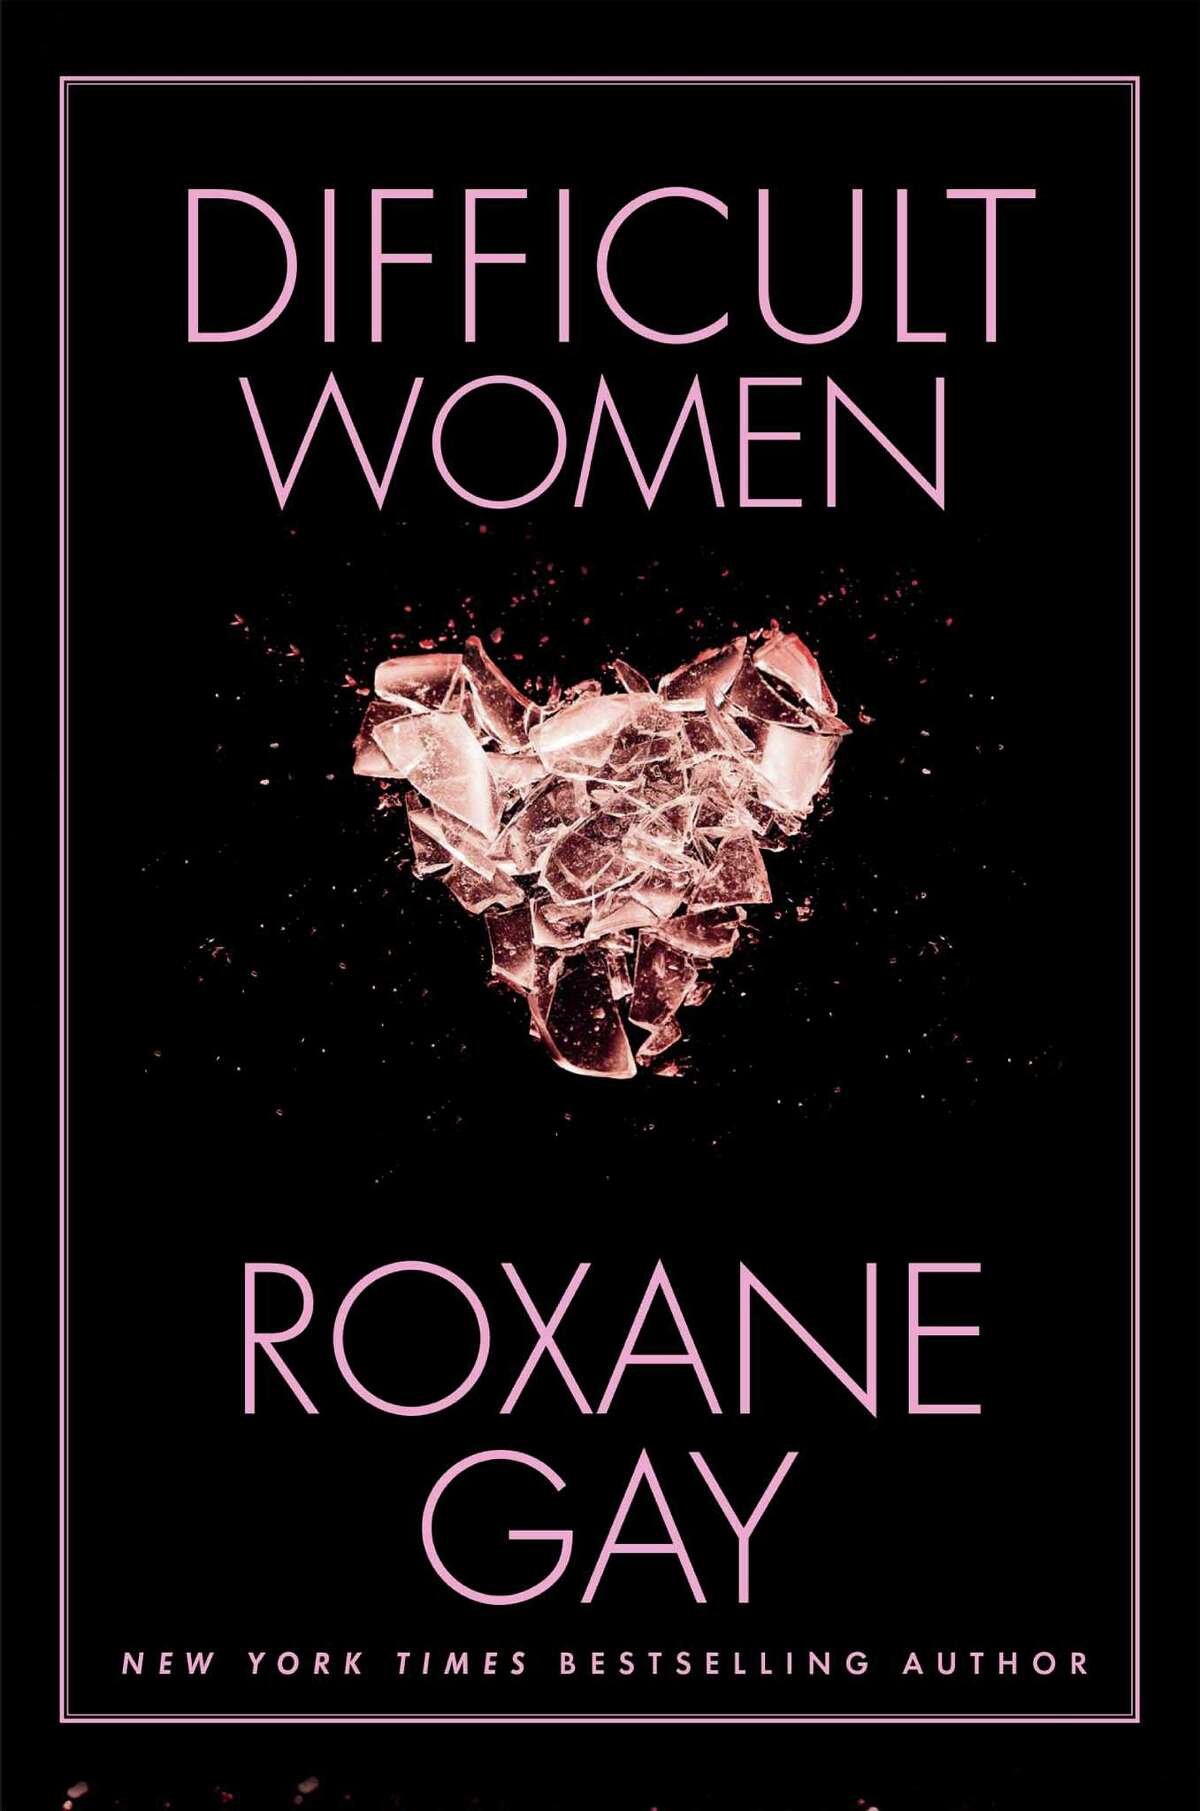 "Difficult Women" by Roxane Gay, Grove Press, 2017